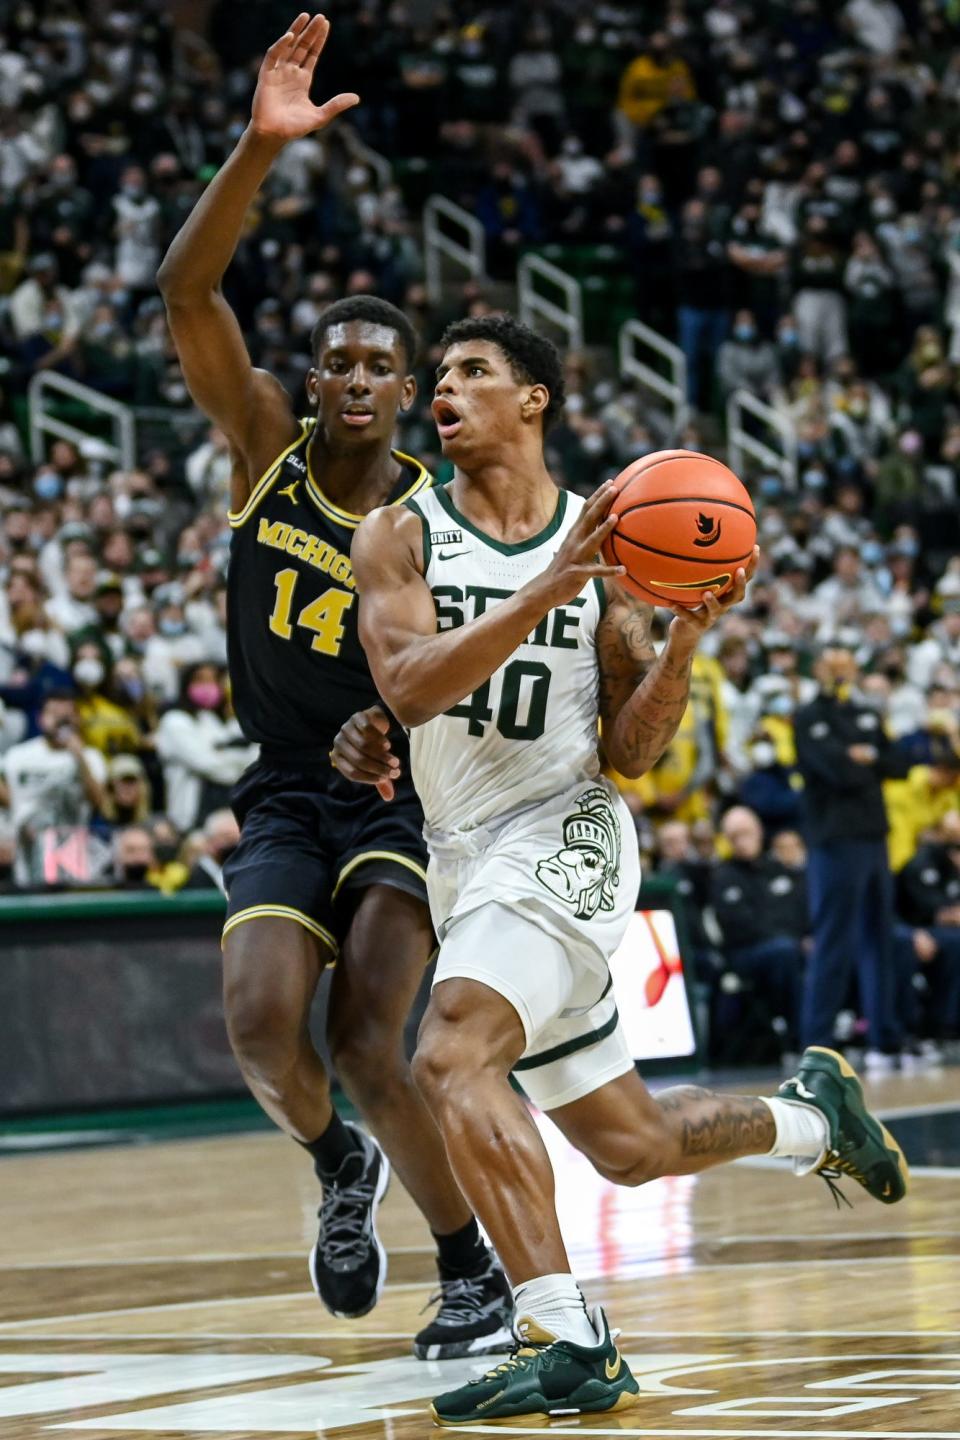 Michigan State's Keon Coleman, right, drives to the basket as Michigan's Moussa Diabate defends during the second half on Saturday, Jan. 29, 2022, at the Breslin Center in East Lansing.